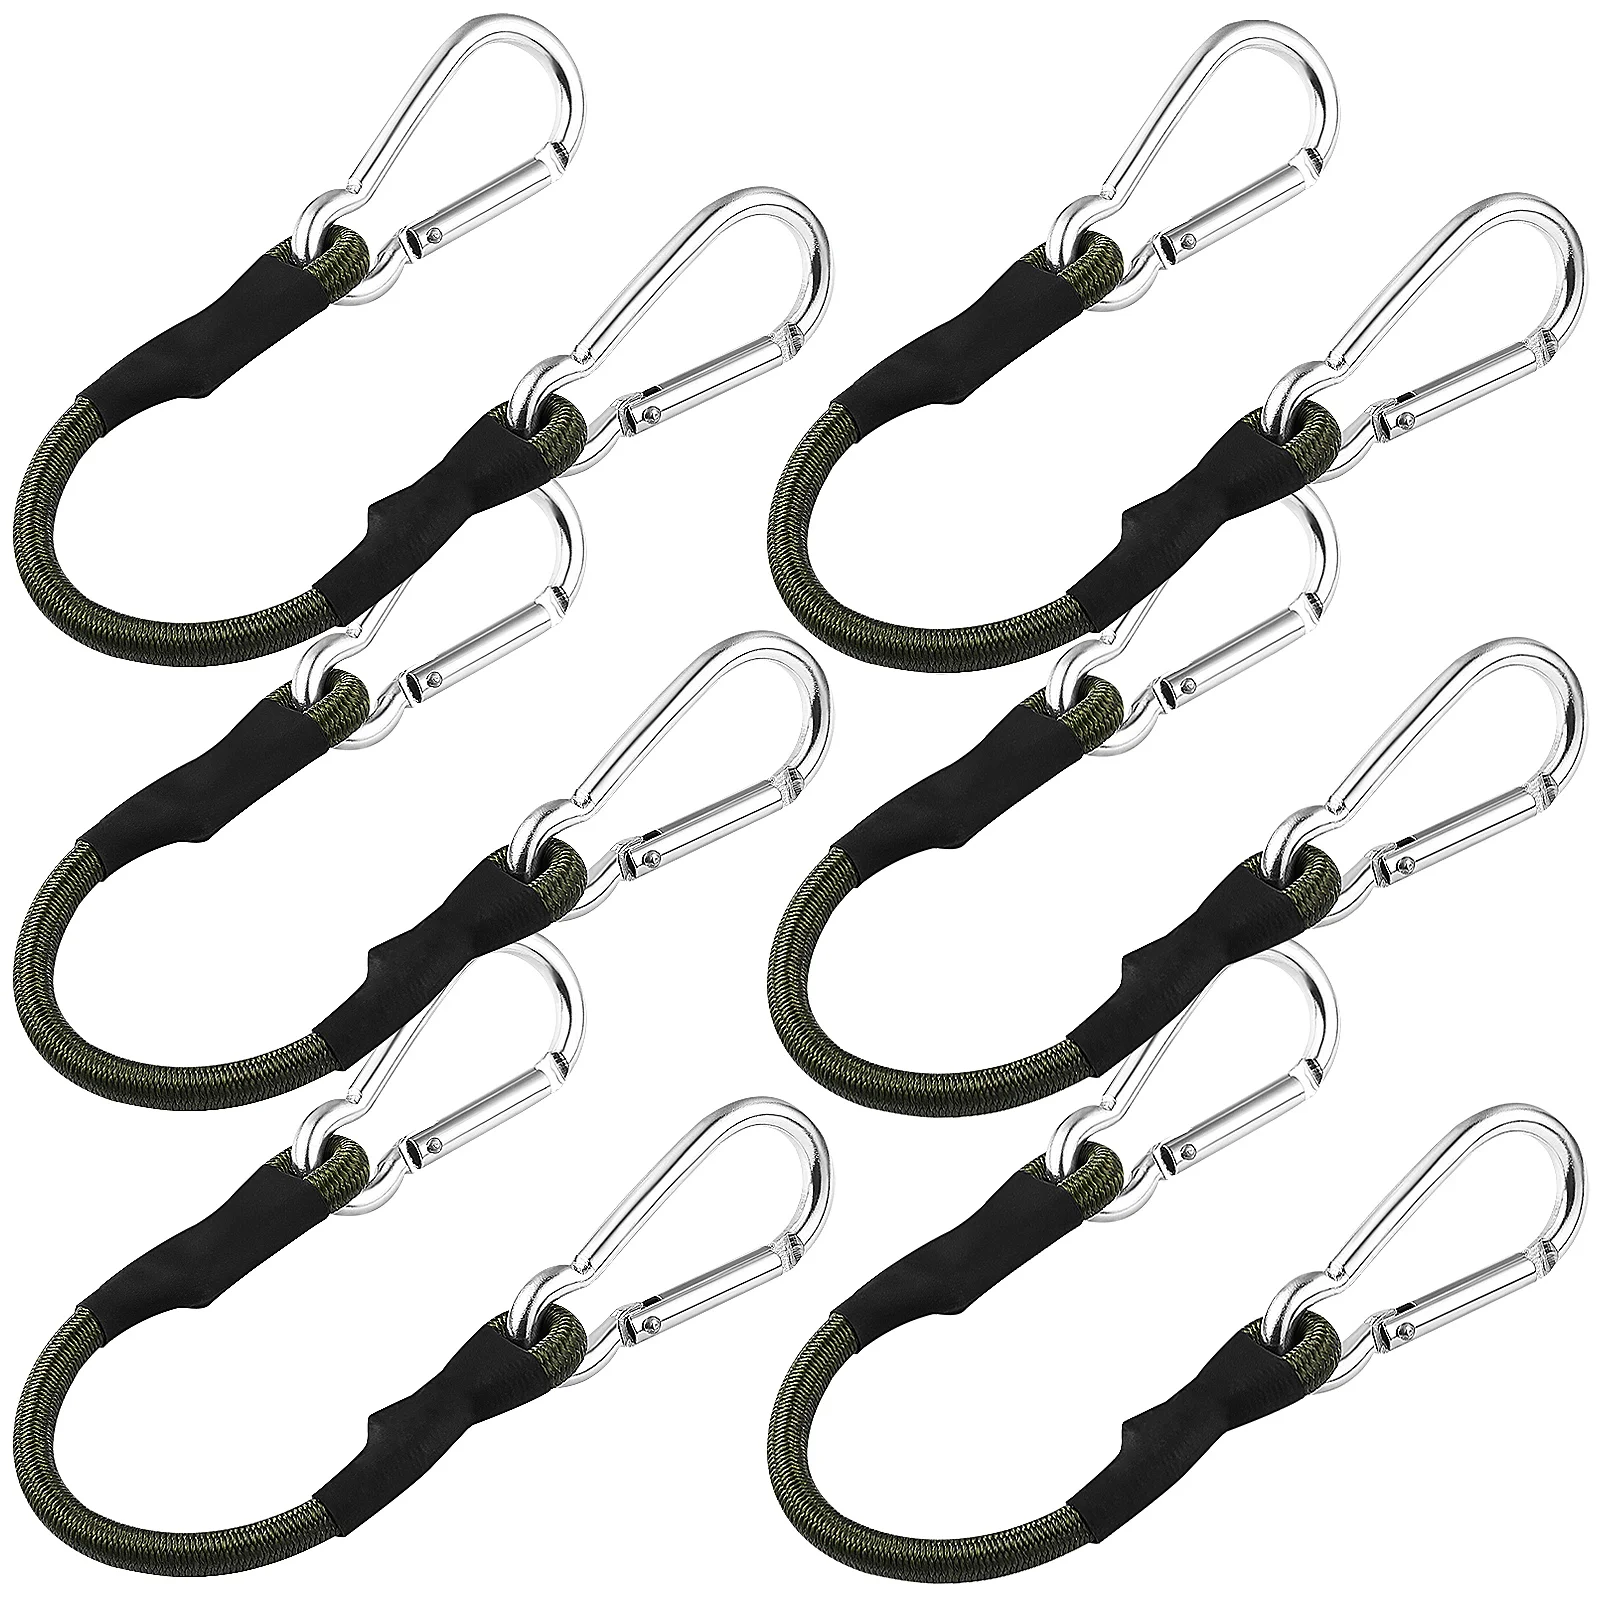 

6 Pcs Elastic Rope Tent Fixing Cords Black Out Bungee Heavy Duty Camping Straps Binding Belt Belts Packing Adjustable